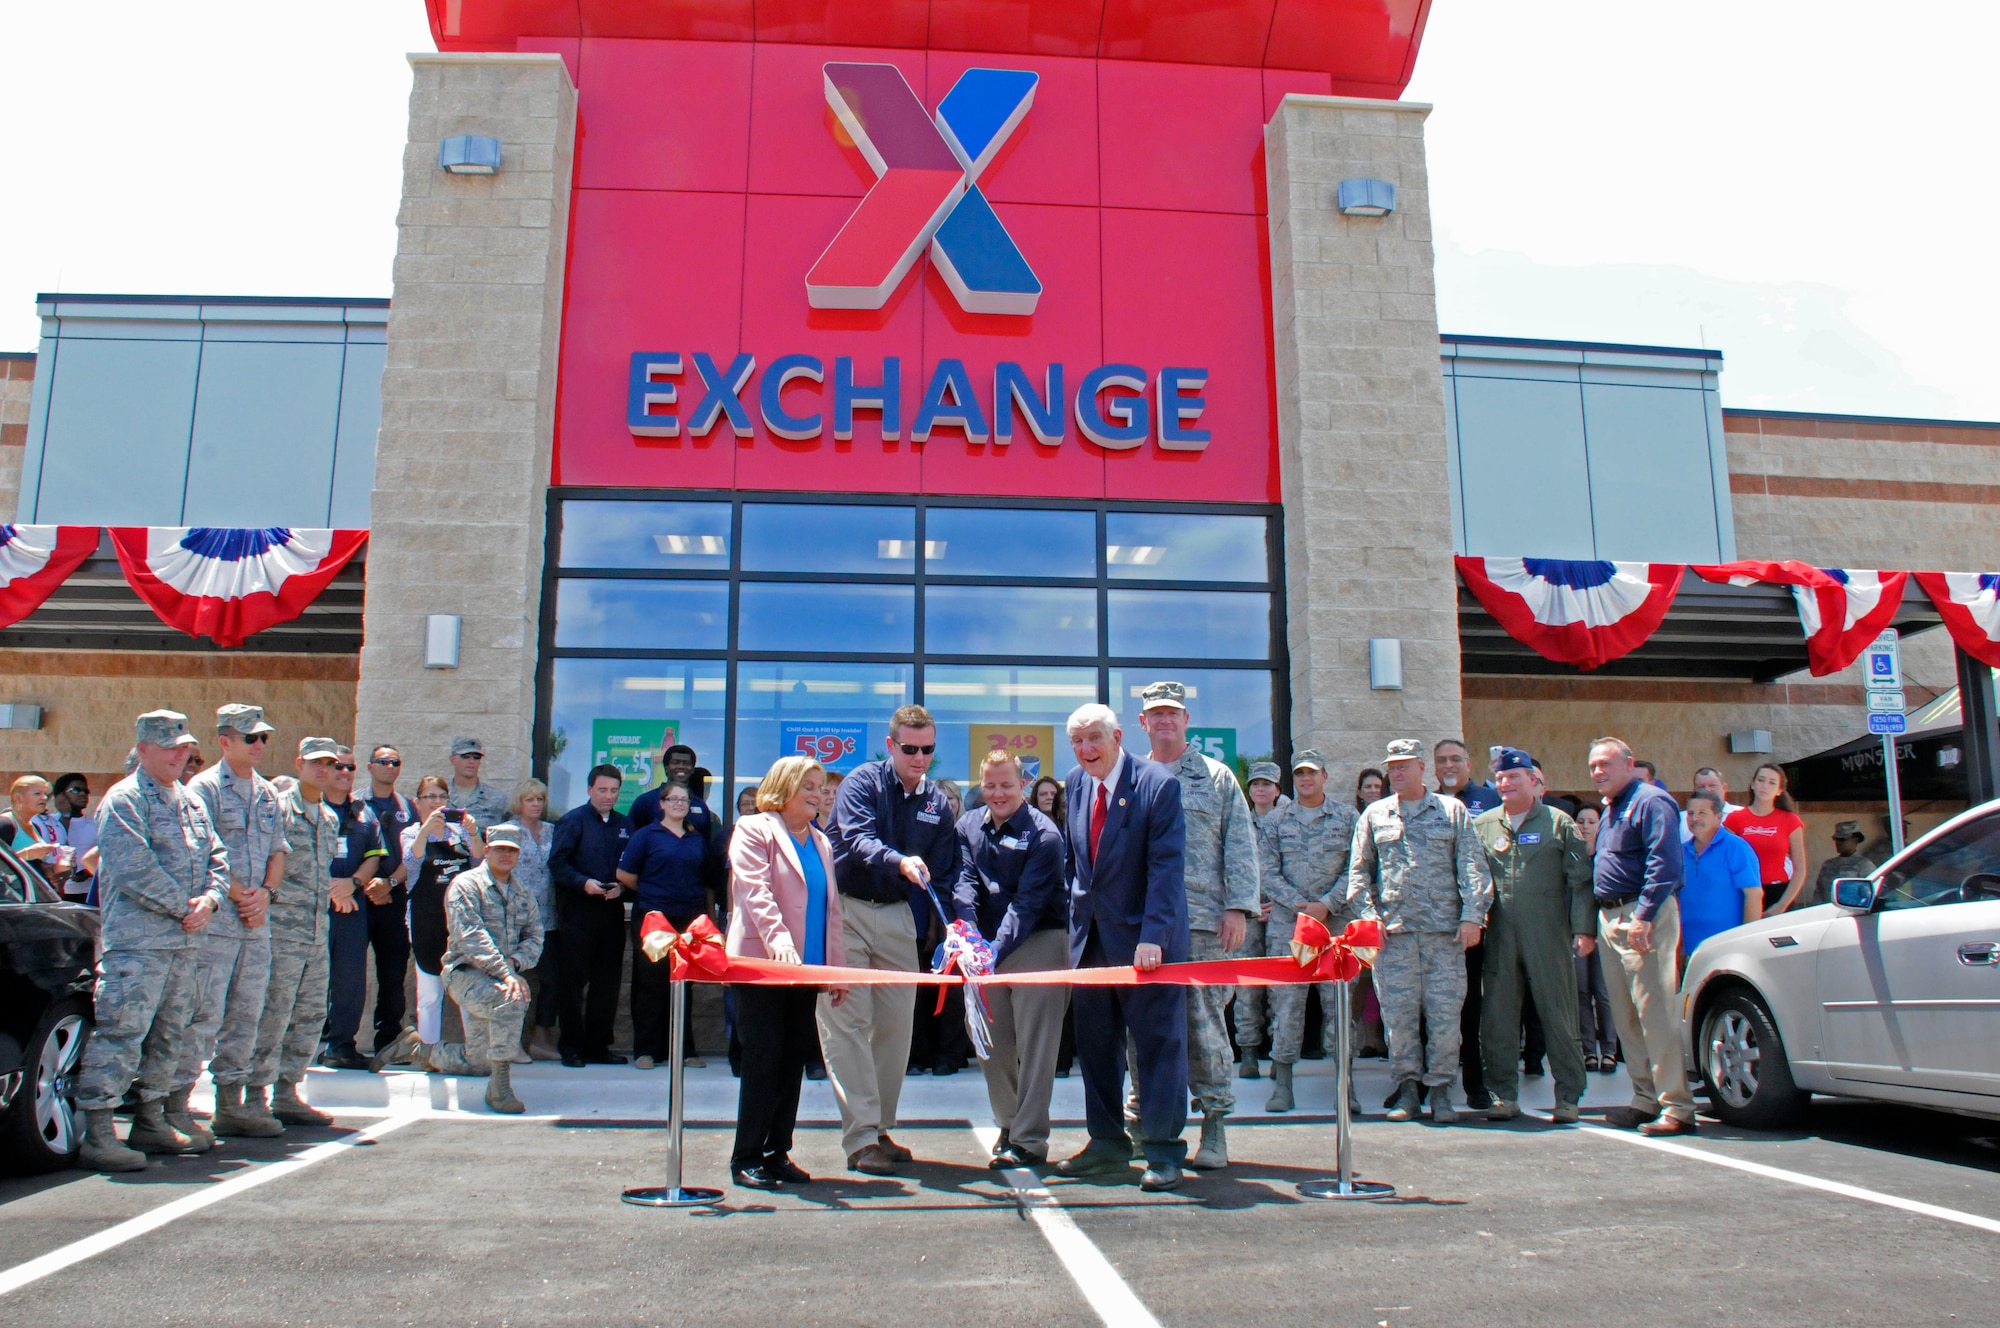 The Army Air Force Exchange Service Express is officially opened during a ribbon cutting at Homestead Air Reserve Base, Fla., Aug. 20. The AAFES Express is a 10,500 square foot facility that includes military clothing, four-pump gas station and convenience store. (Air Force photo/Senior Airman Nicolas Caceres)